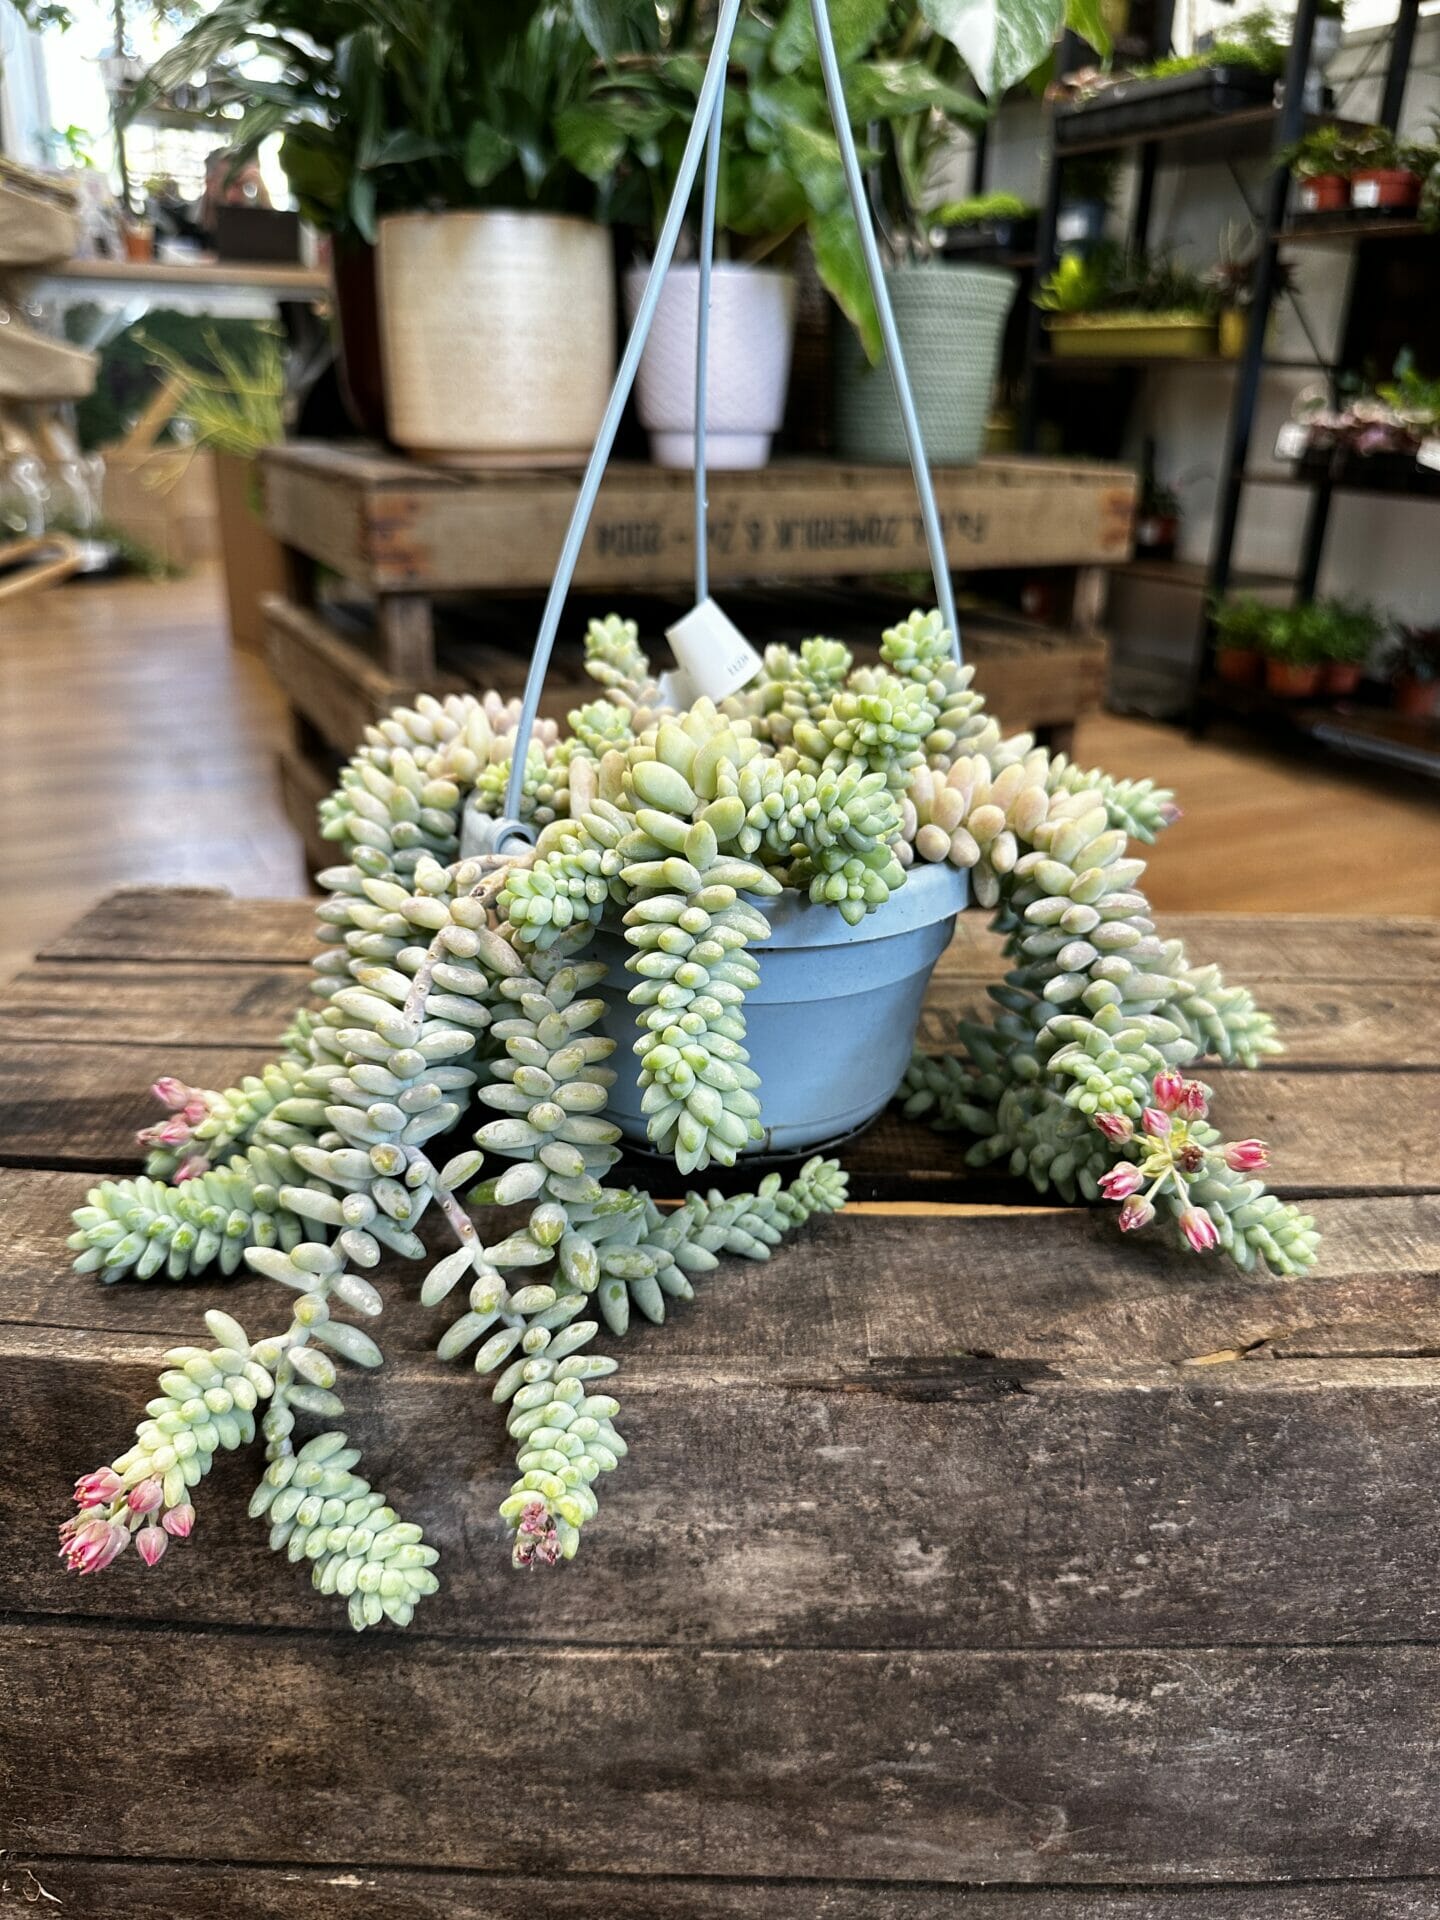 Sedum Burros Tail succulent in hanging basket on wood table with shop of houseplants visible in background